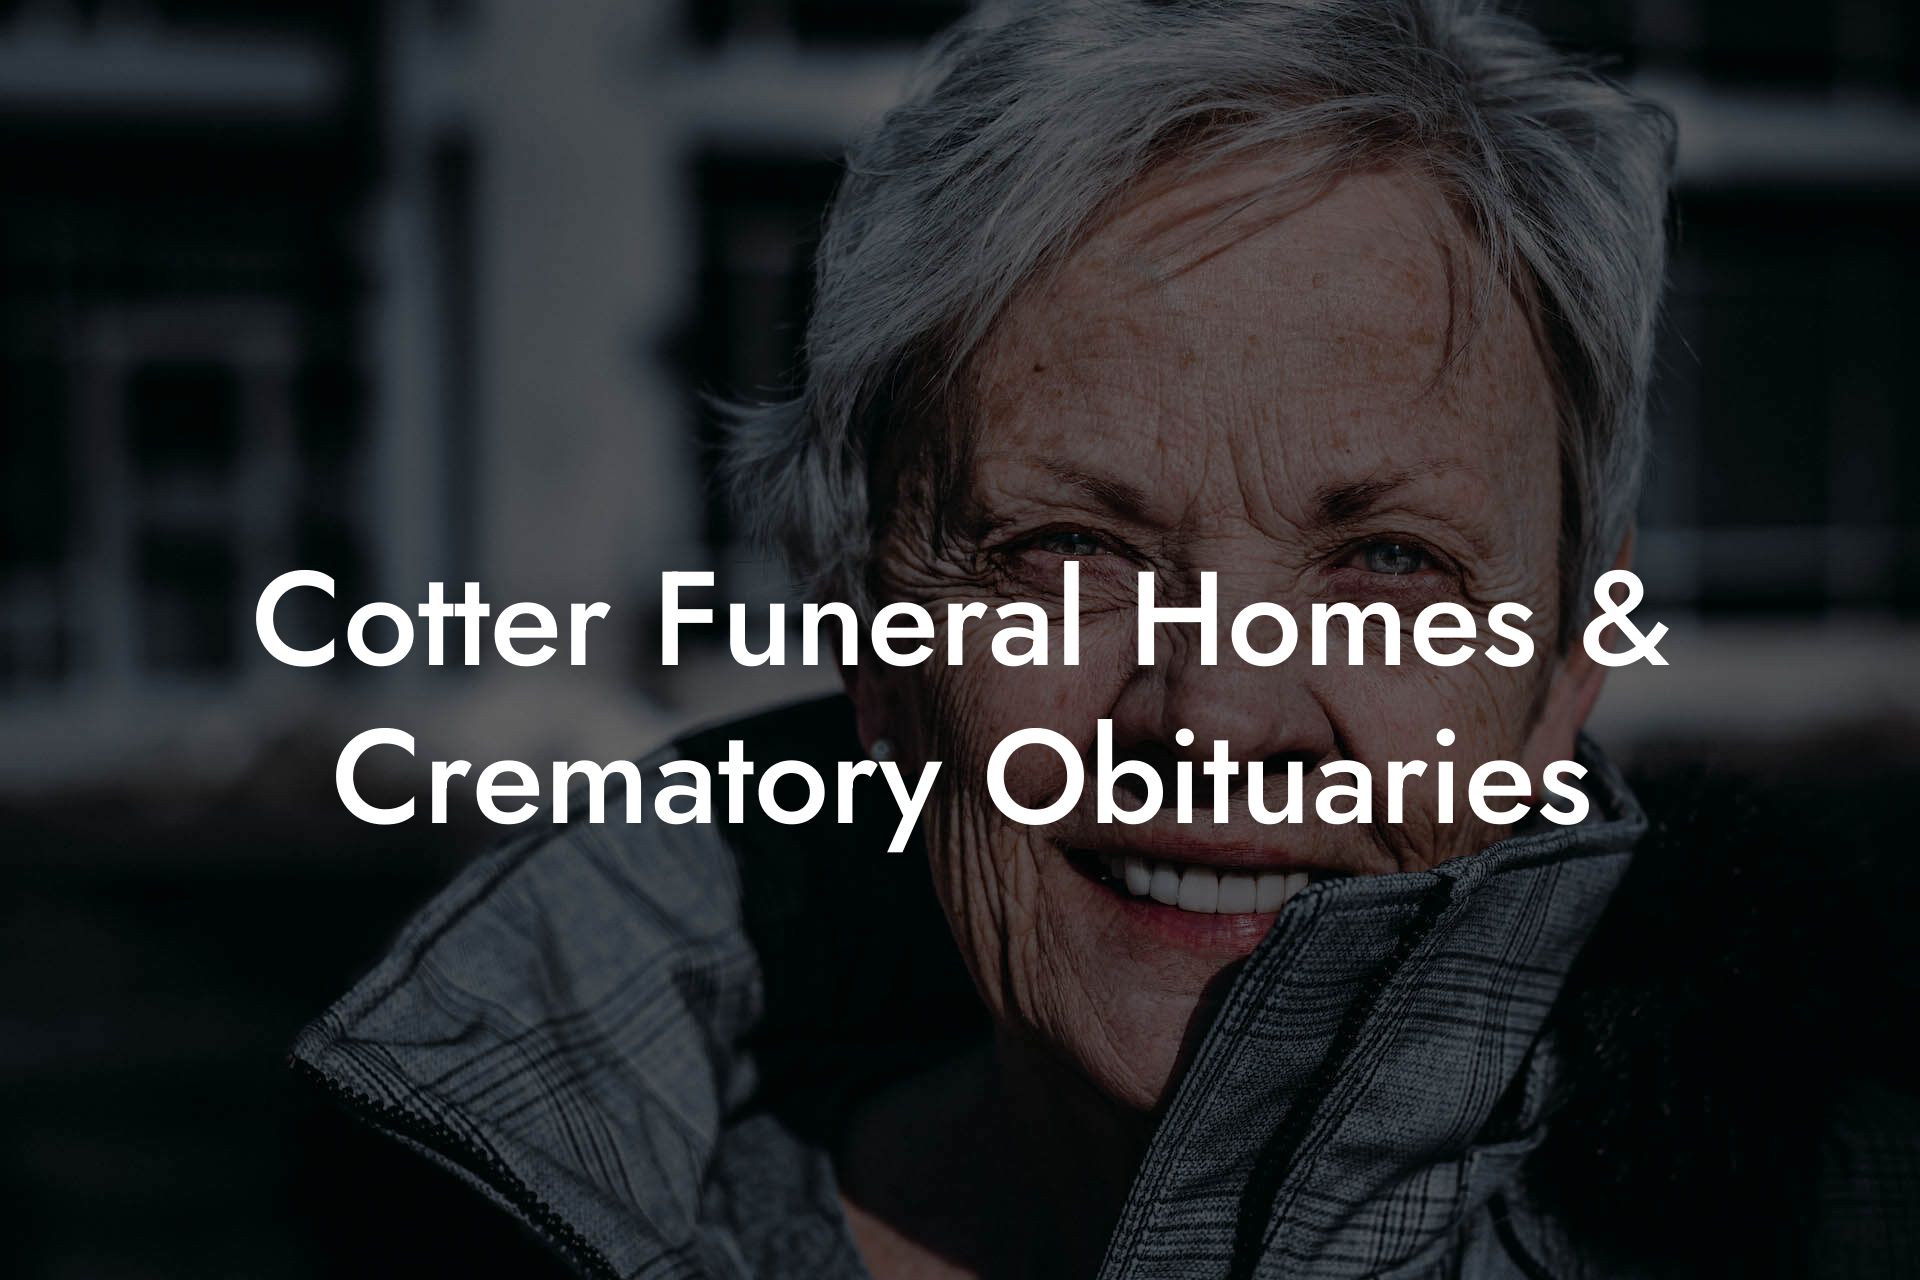 Cotter Funeral Homes & Crematory Obituaries